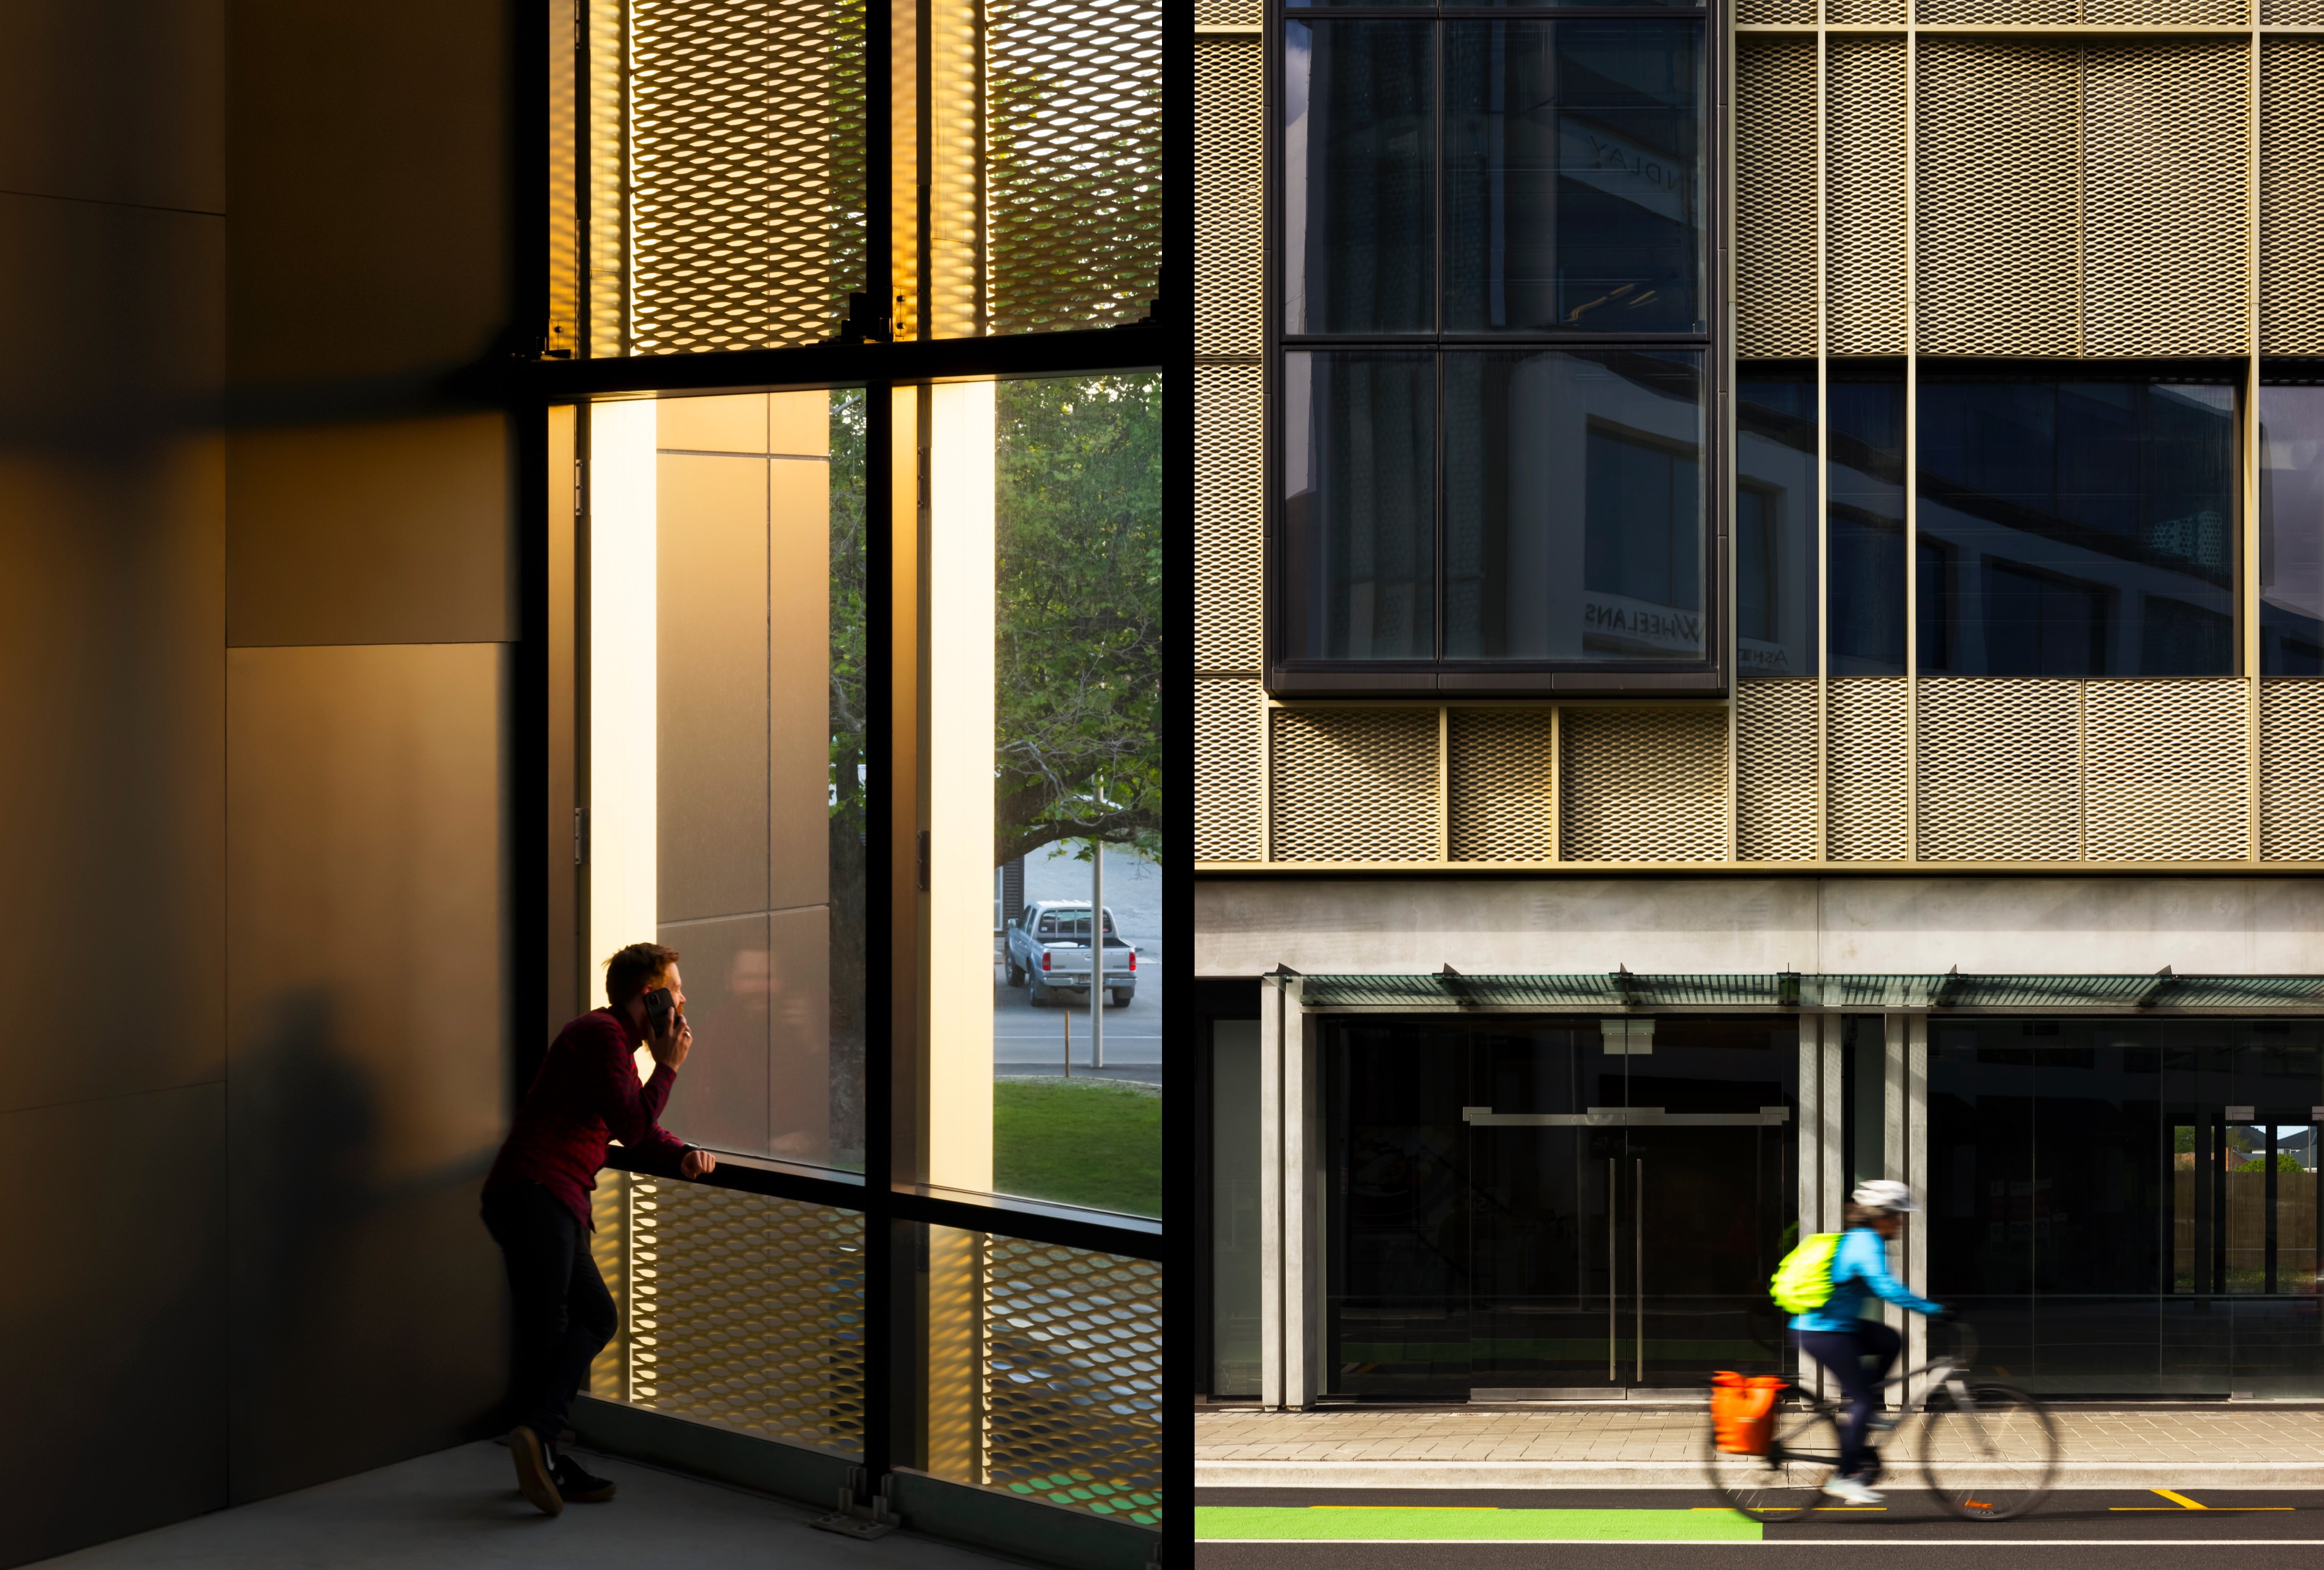 Split image. Left side depicts man on cellphone looking out of window. Right side depicts cyclist riding past building